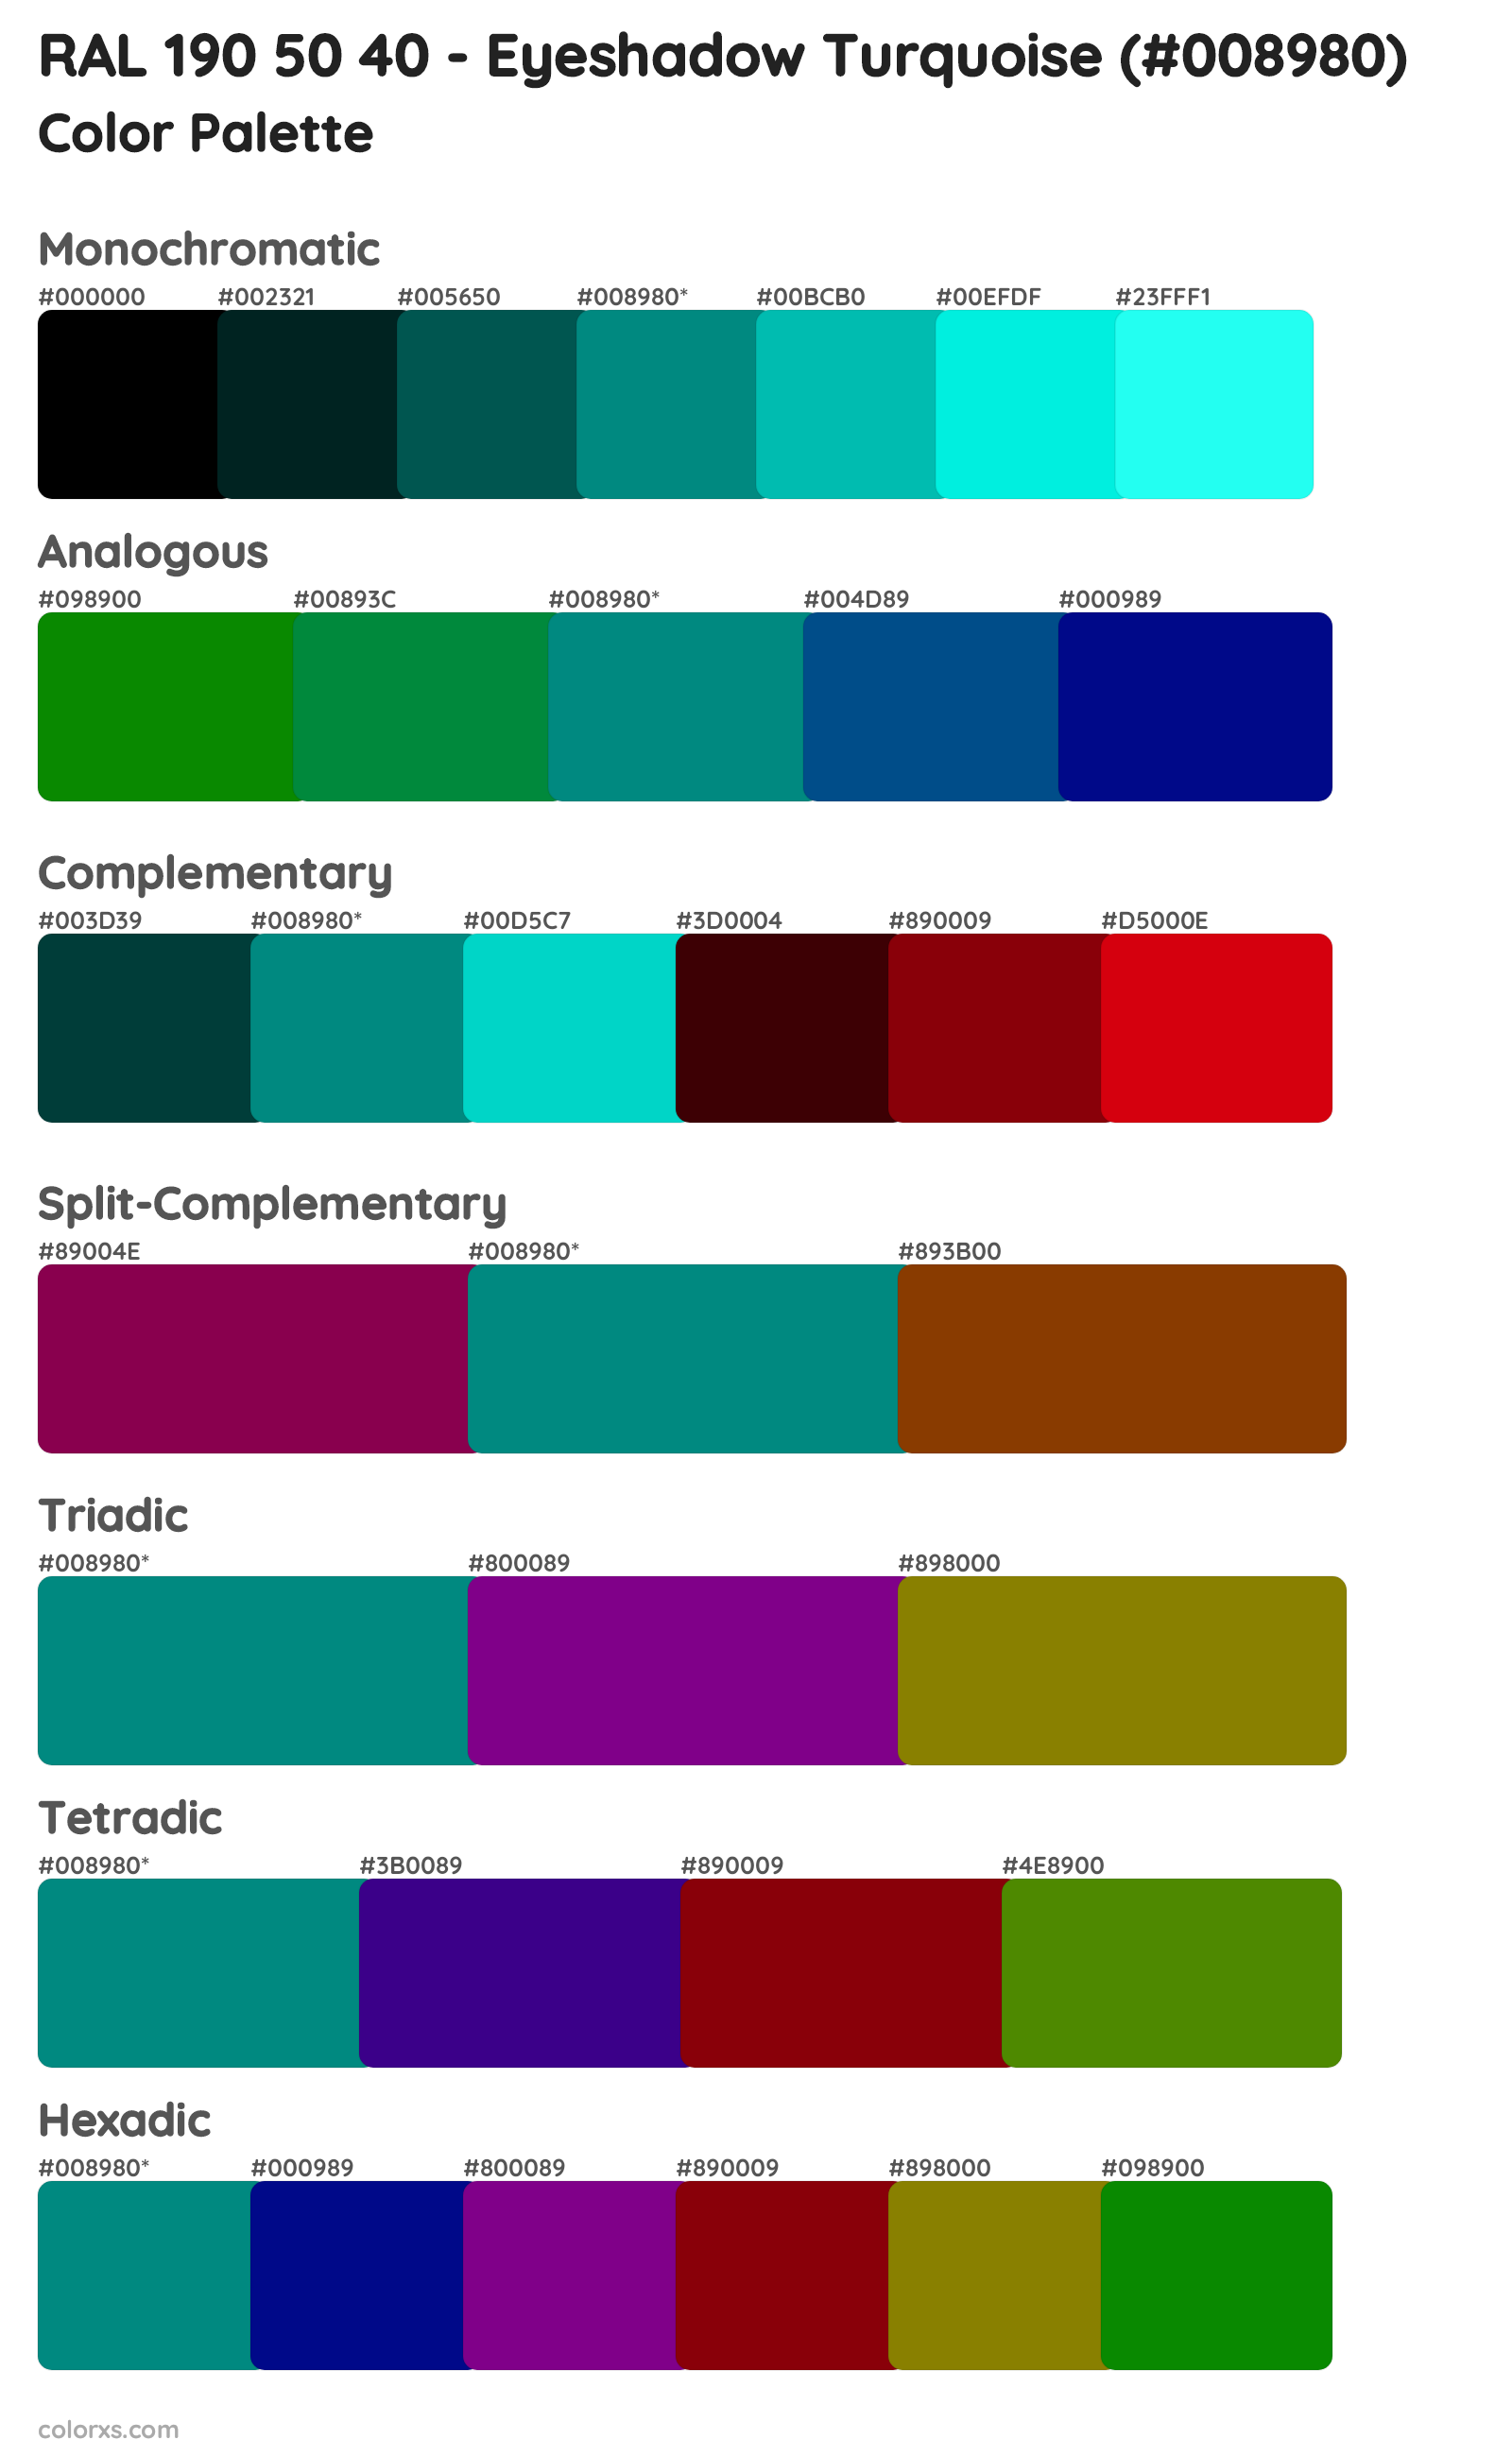 RAL 190 50 40 - Eyeshadow Turquoise Color Scheme Palettes